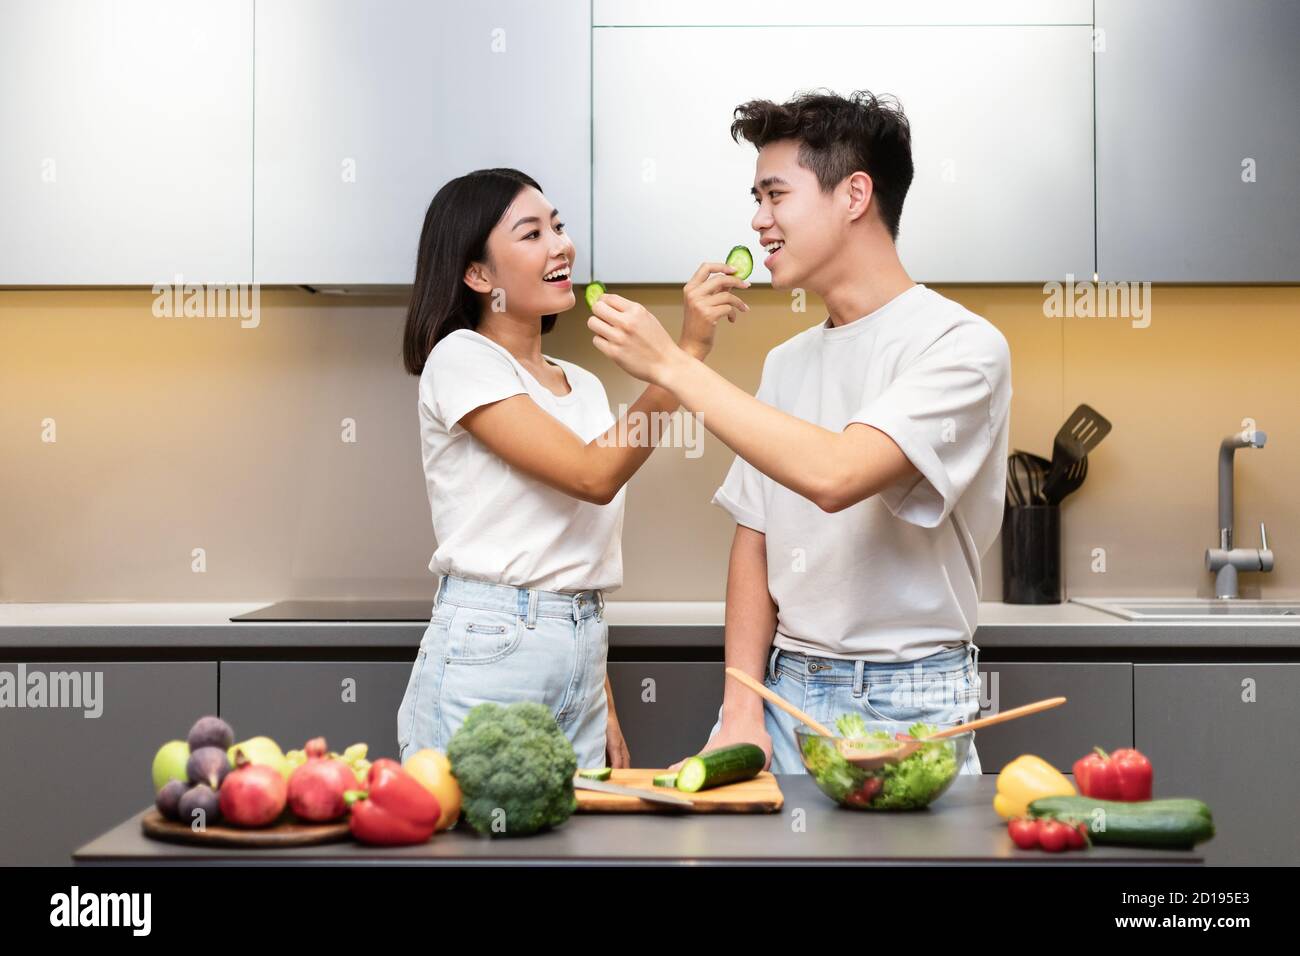 Japanese Couple Cooking Feeding Each Other Tasting Dinner In Kitchen Stock Photo